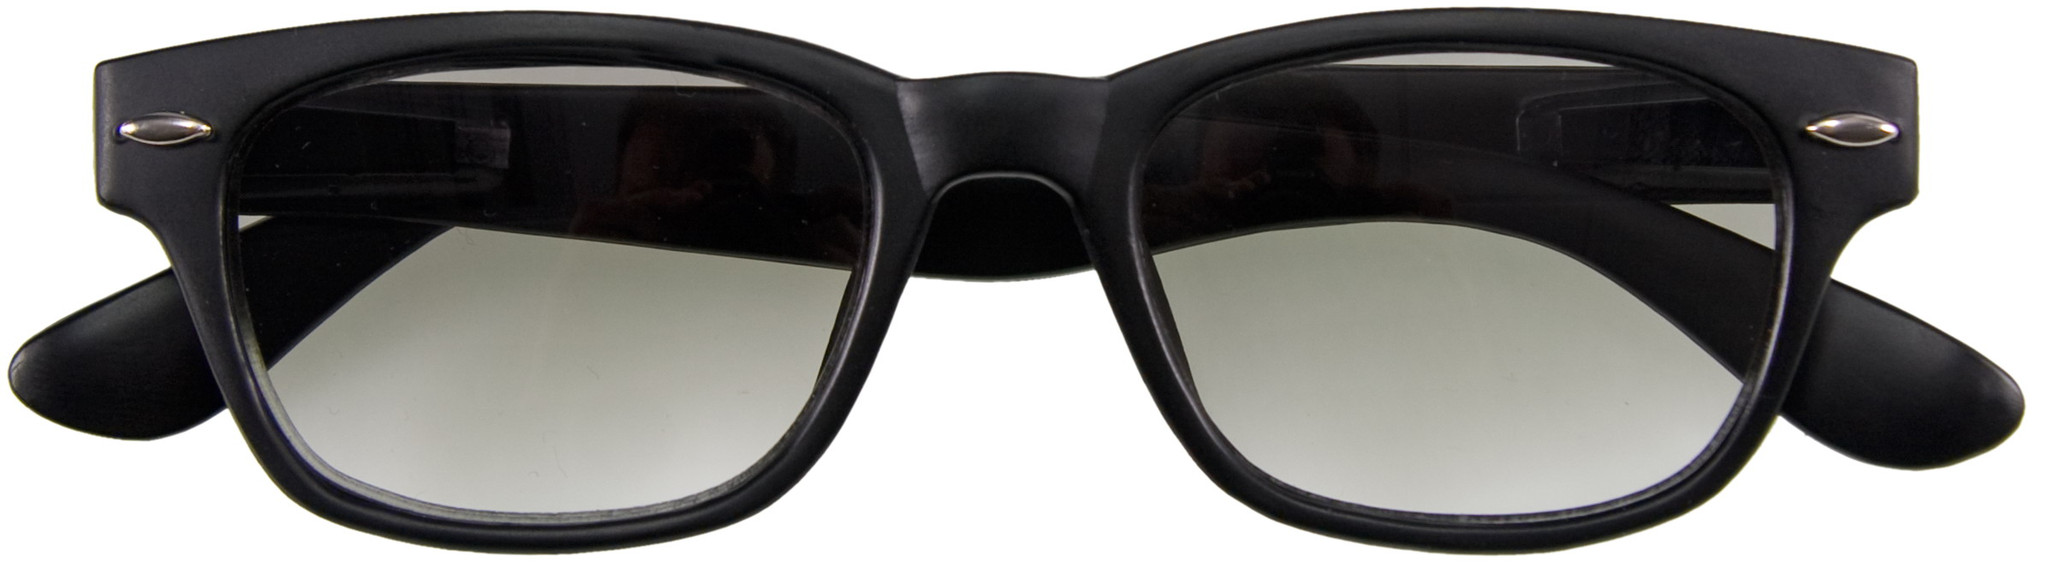 Woody Sun Black Readers by I Need You Readers